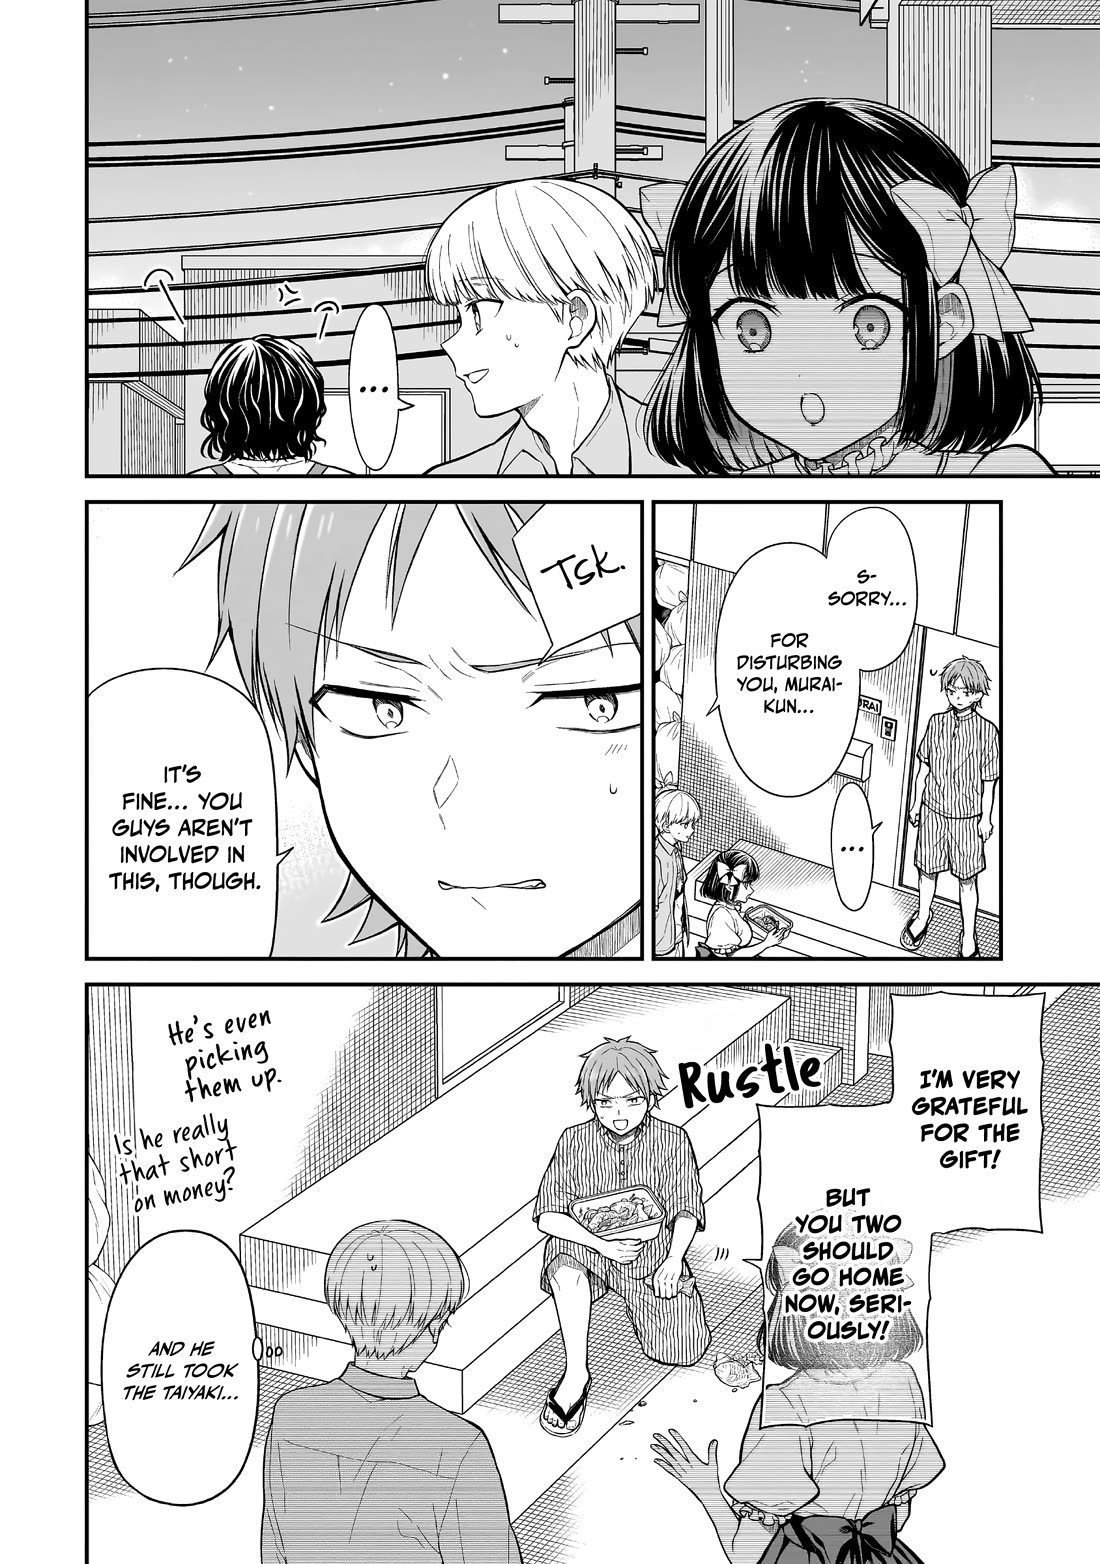 Miyu-chan Will Always Be Your Friend - chapter 4 - #5